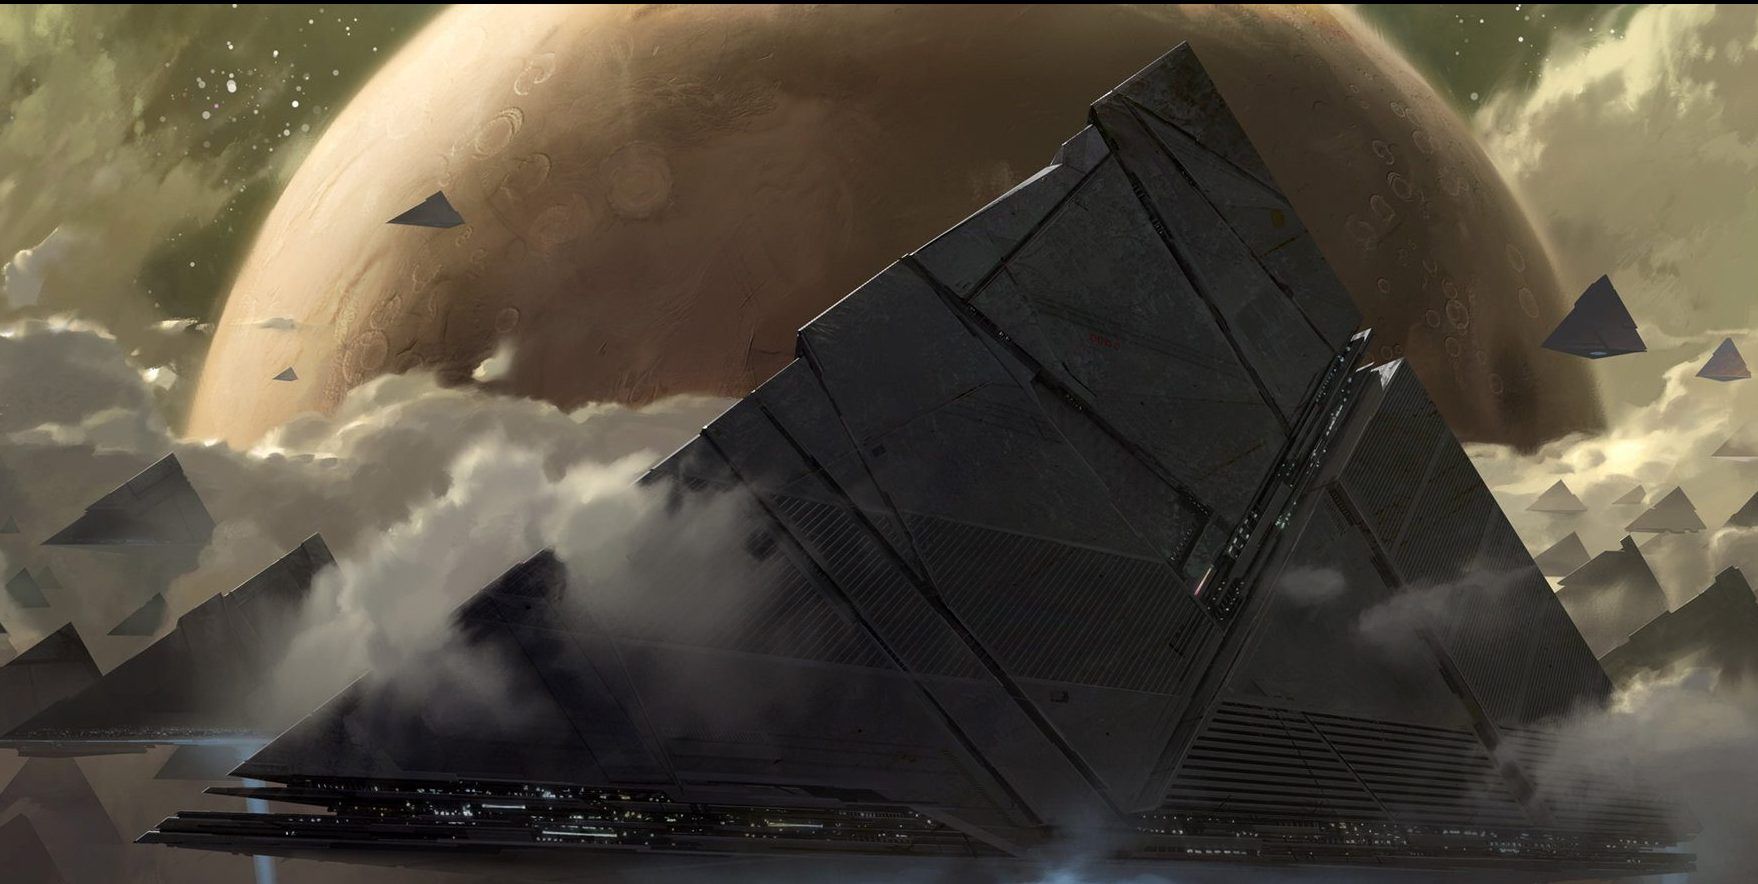 Concept art of Pyramid ships from Destiny 2